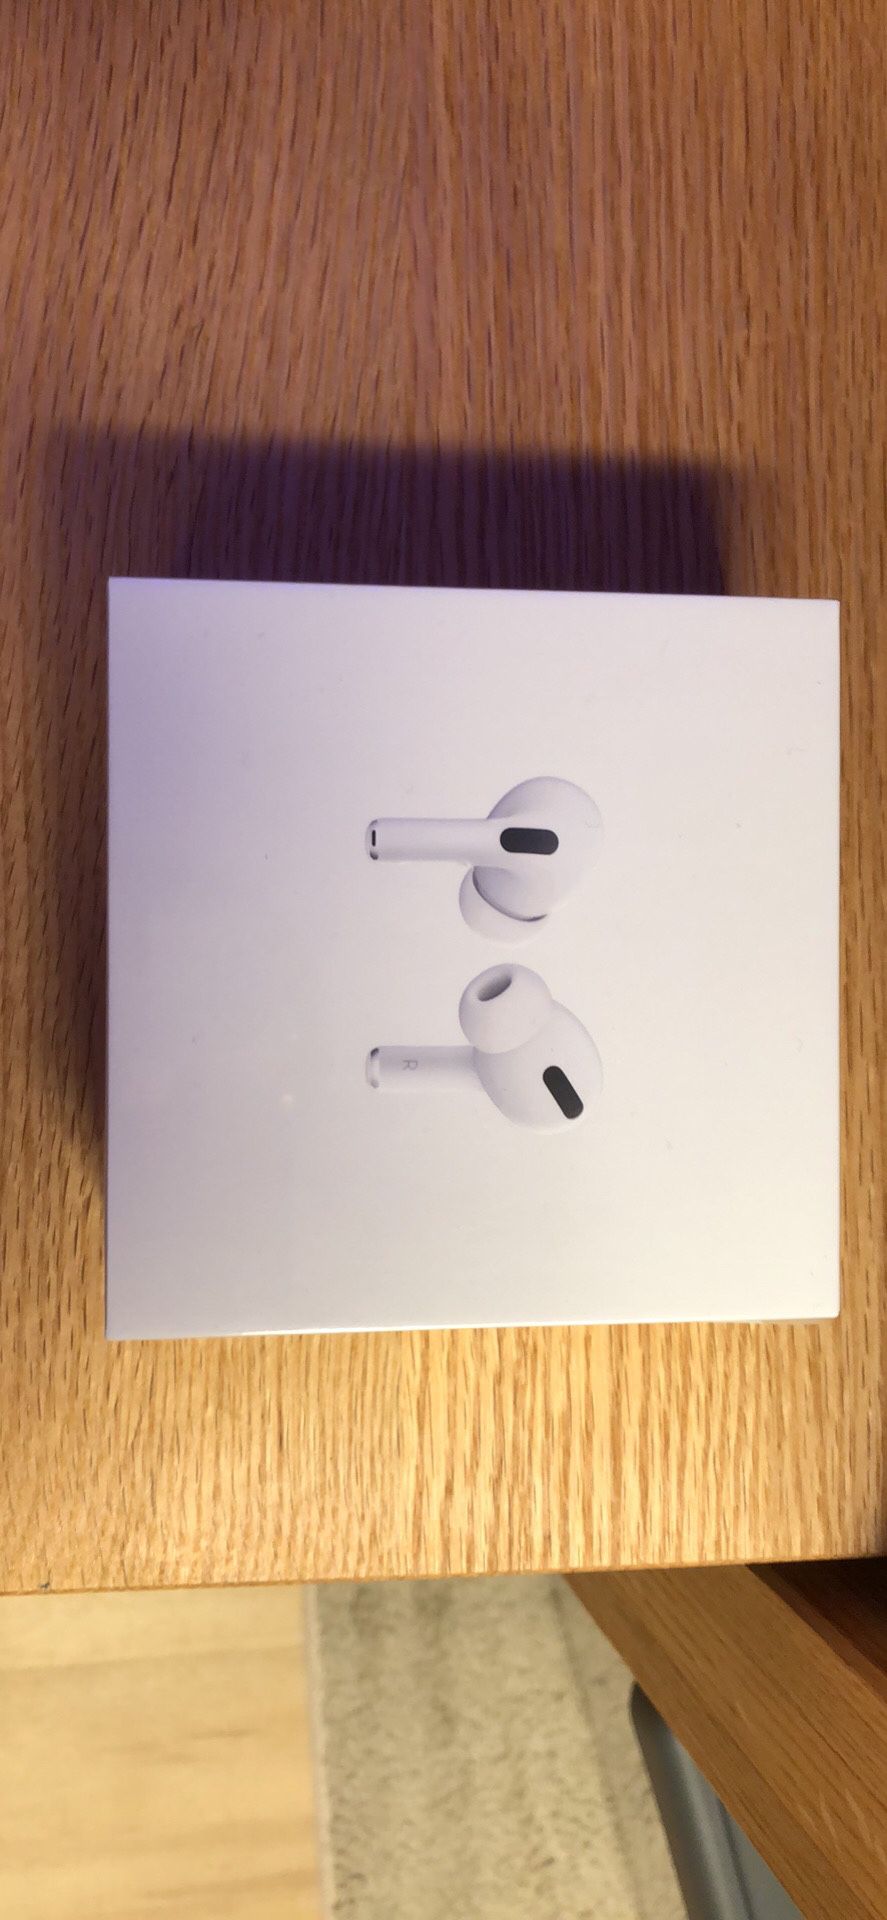 Apple Airpods Pro Brand New